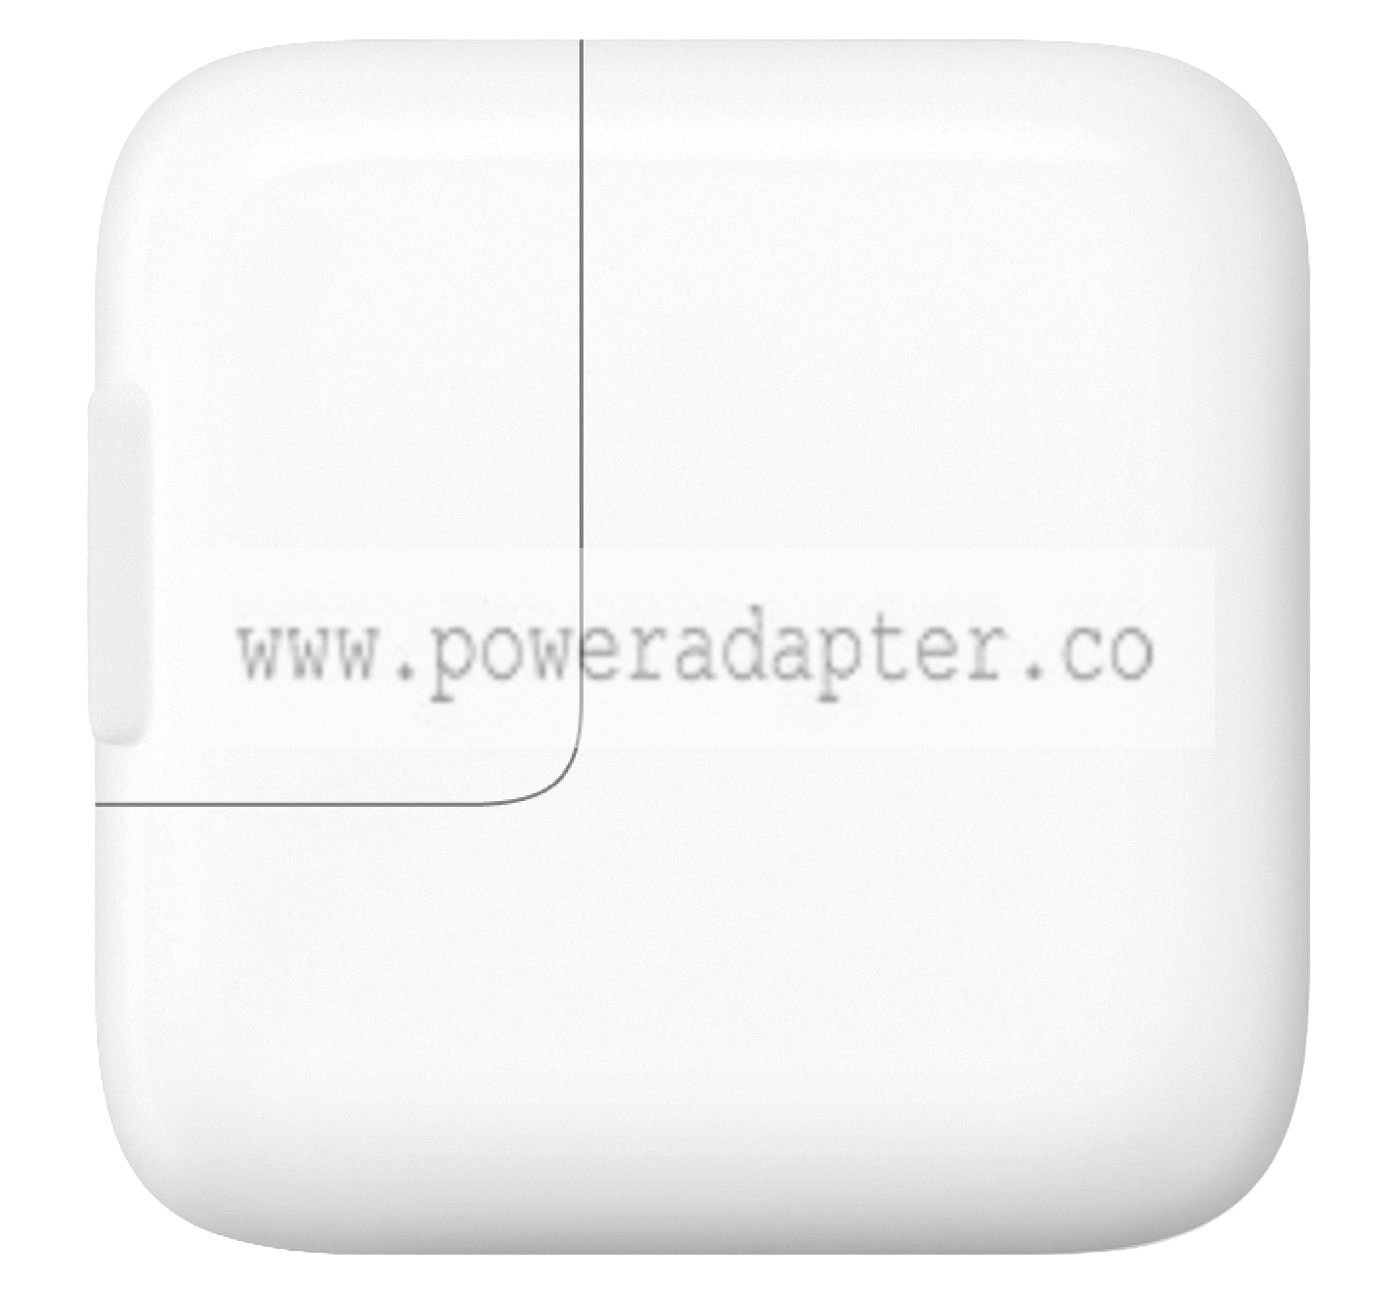 OEM Apple 12W USB Power Adapter Wall Charger A1401 for iPhone, iPad, Compatible Brand: For Apple Brand: Apple MPN: A14